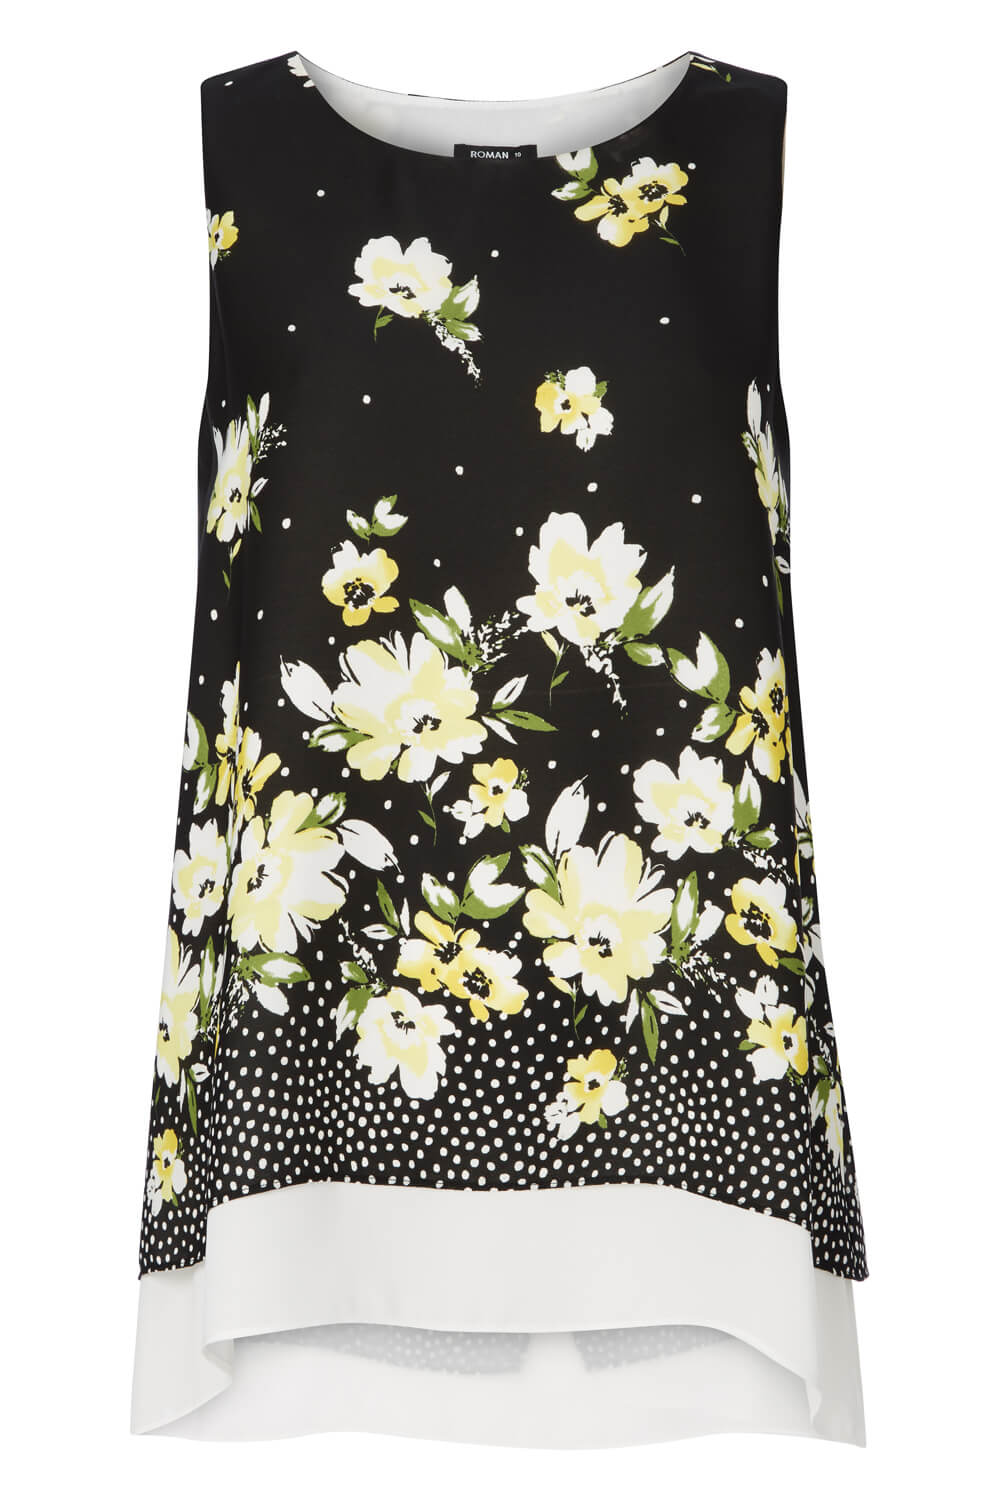 Black Floral Print Overlay Top, Image 4 of 8